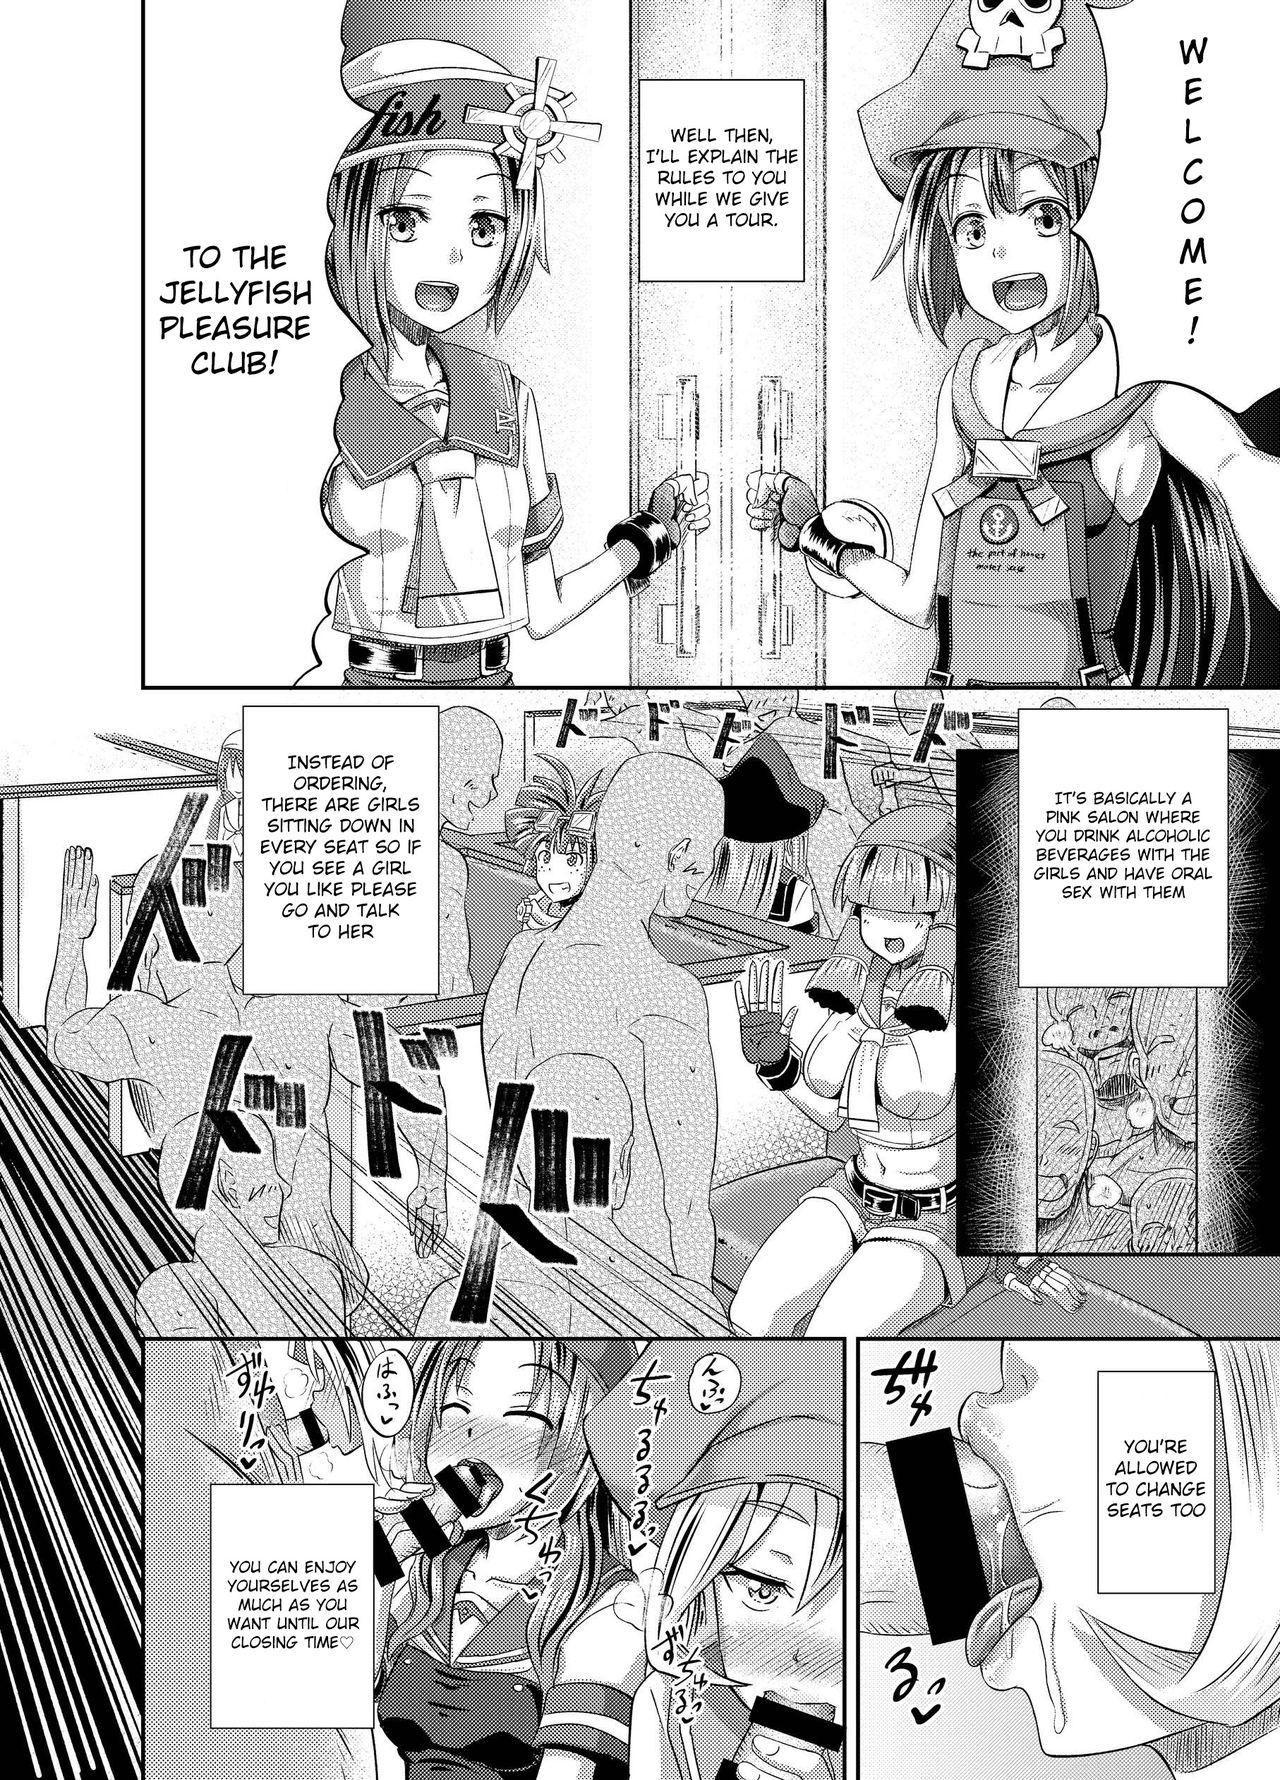 Pussylick Jellyfish Kaizokudan e Youkoso! | Welcome to The Jellyfish Pleasure Club! - Guilty gear Sapphicerotica - Page 3